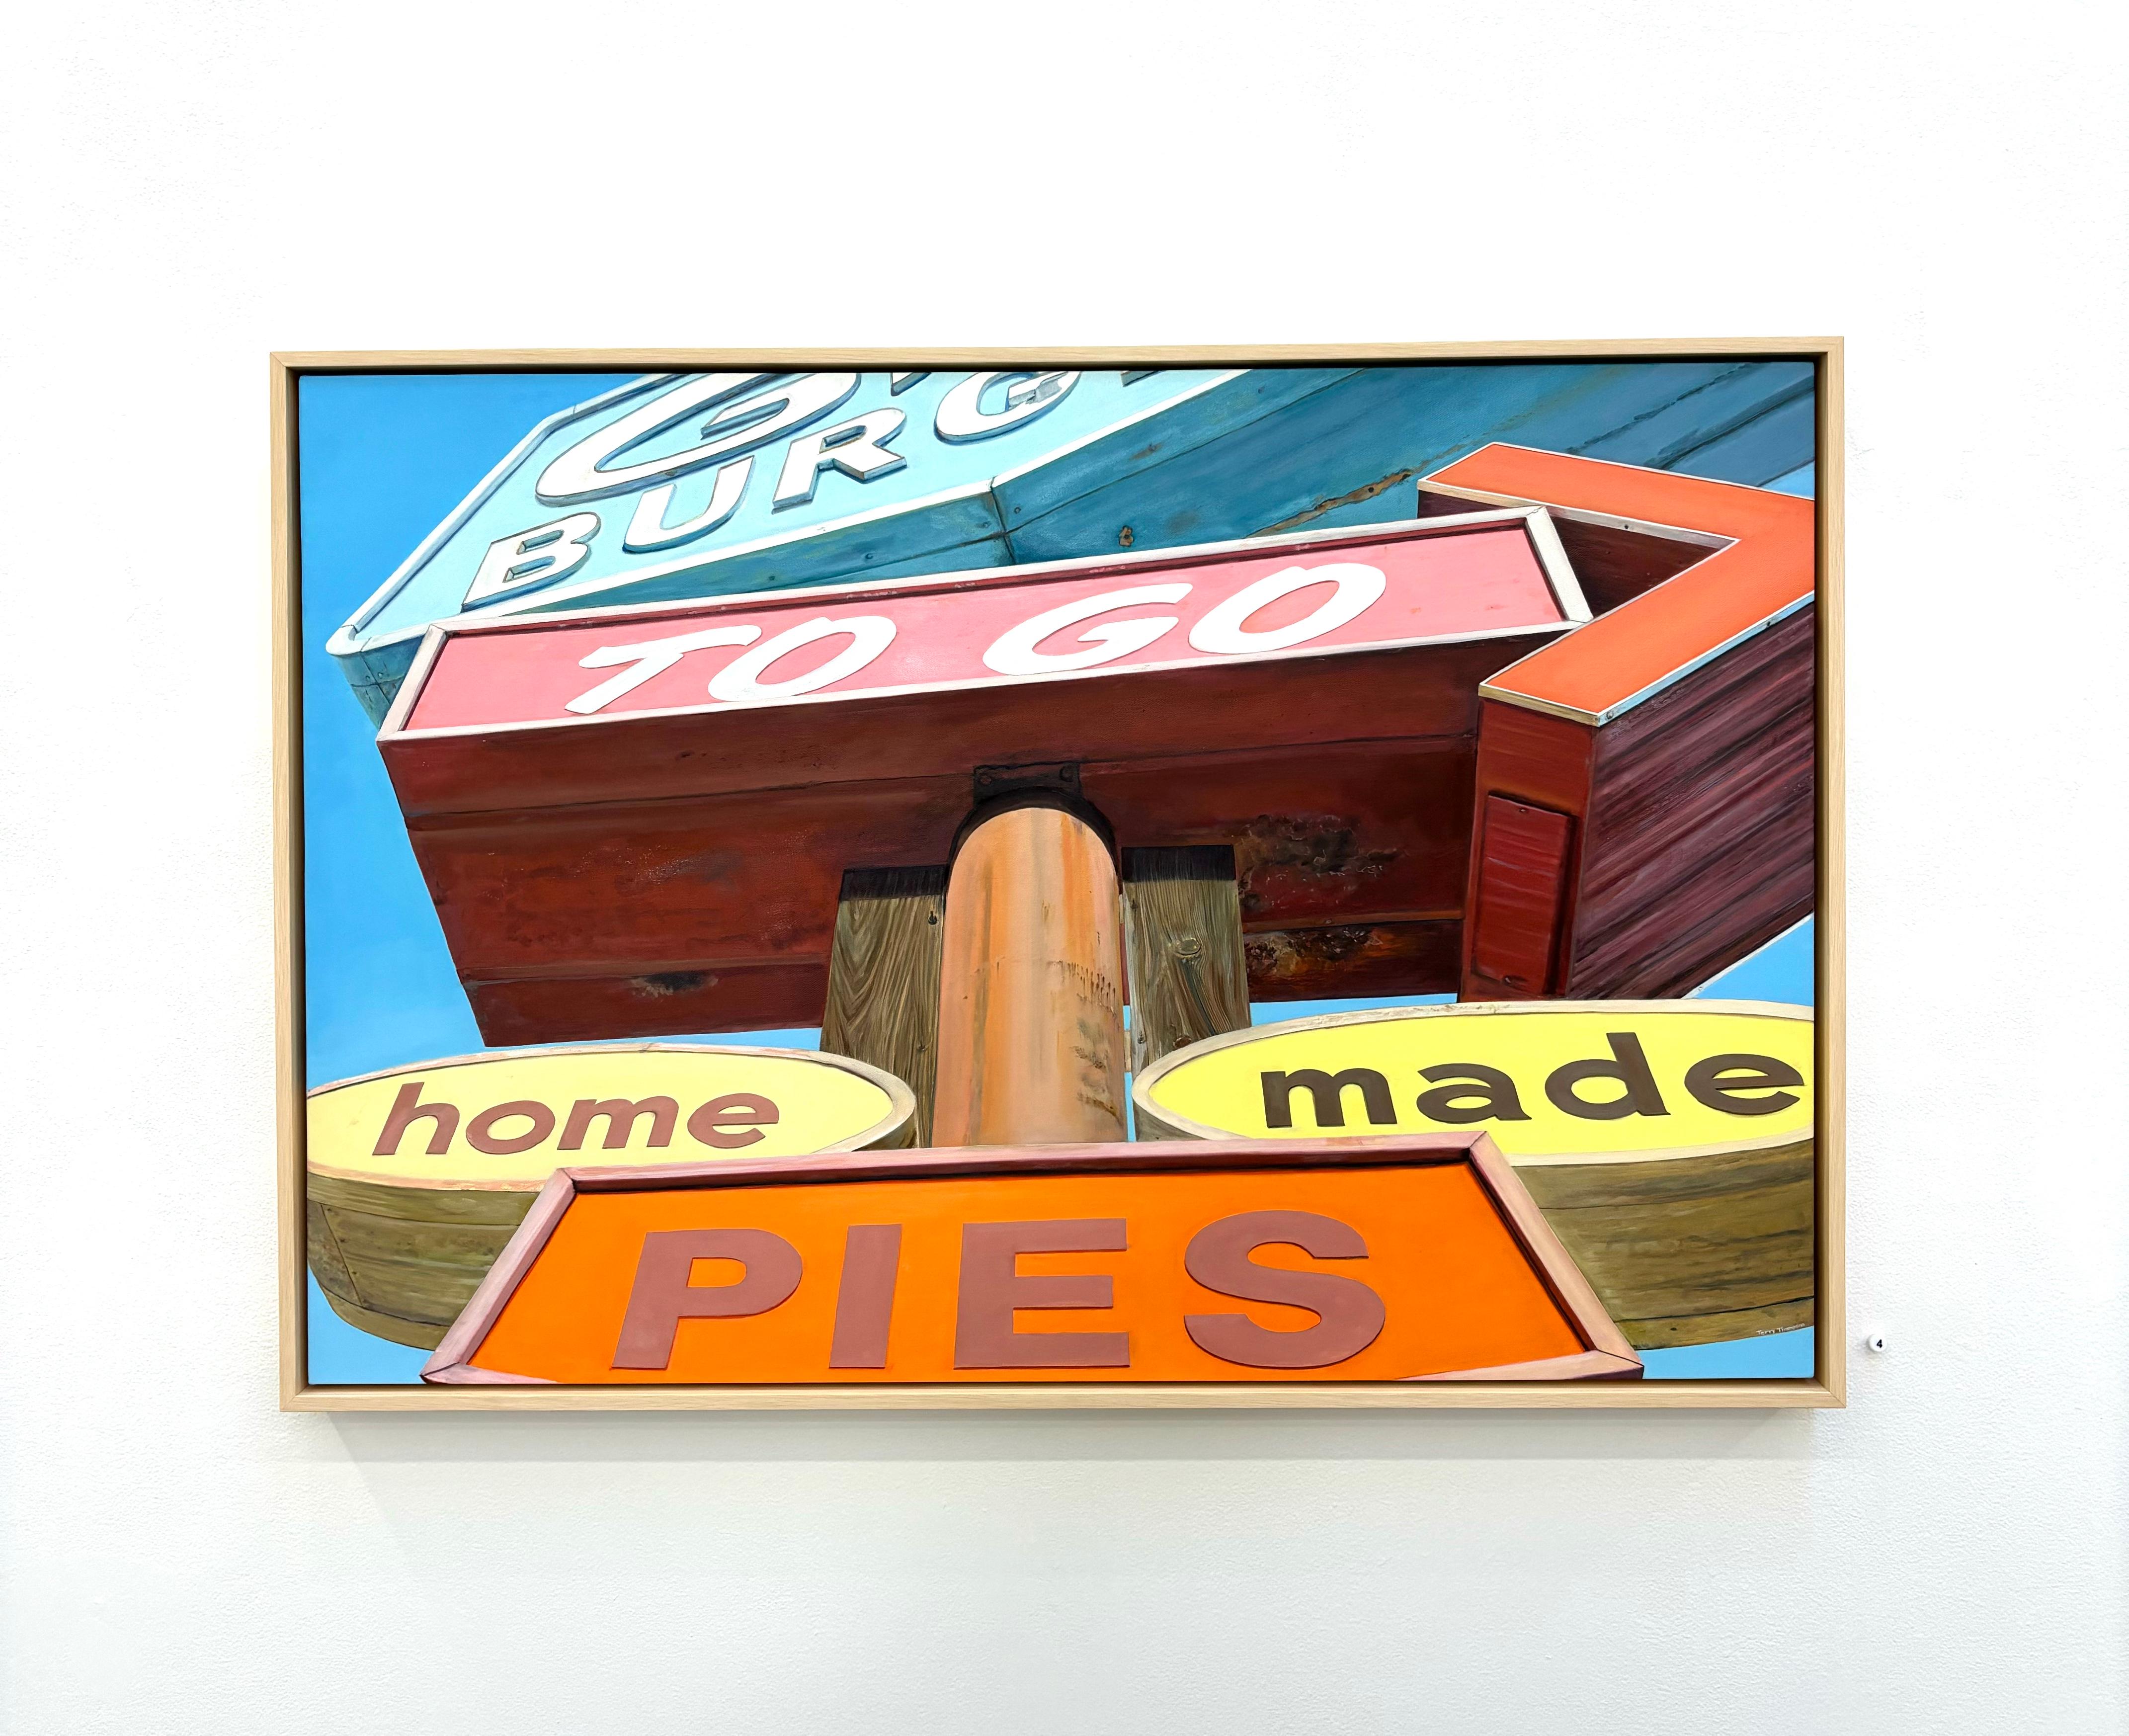 Oakland Burgers & Pies - Painting by Terry Thompson